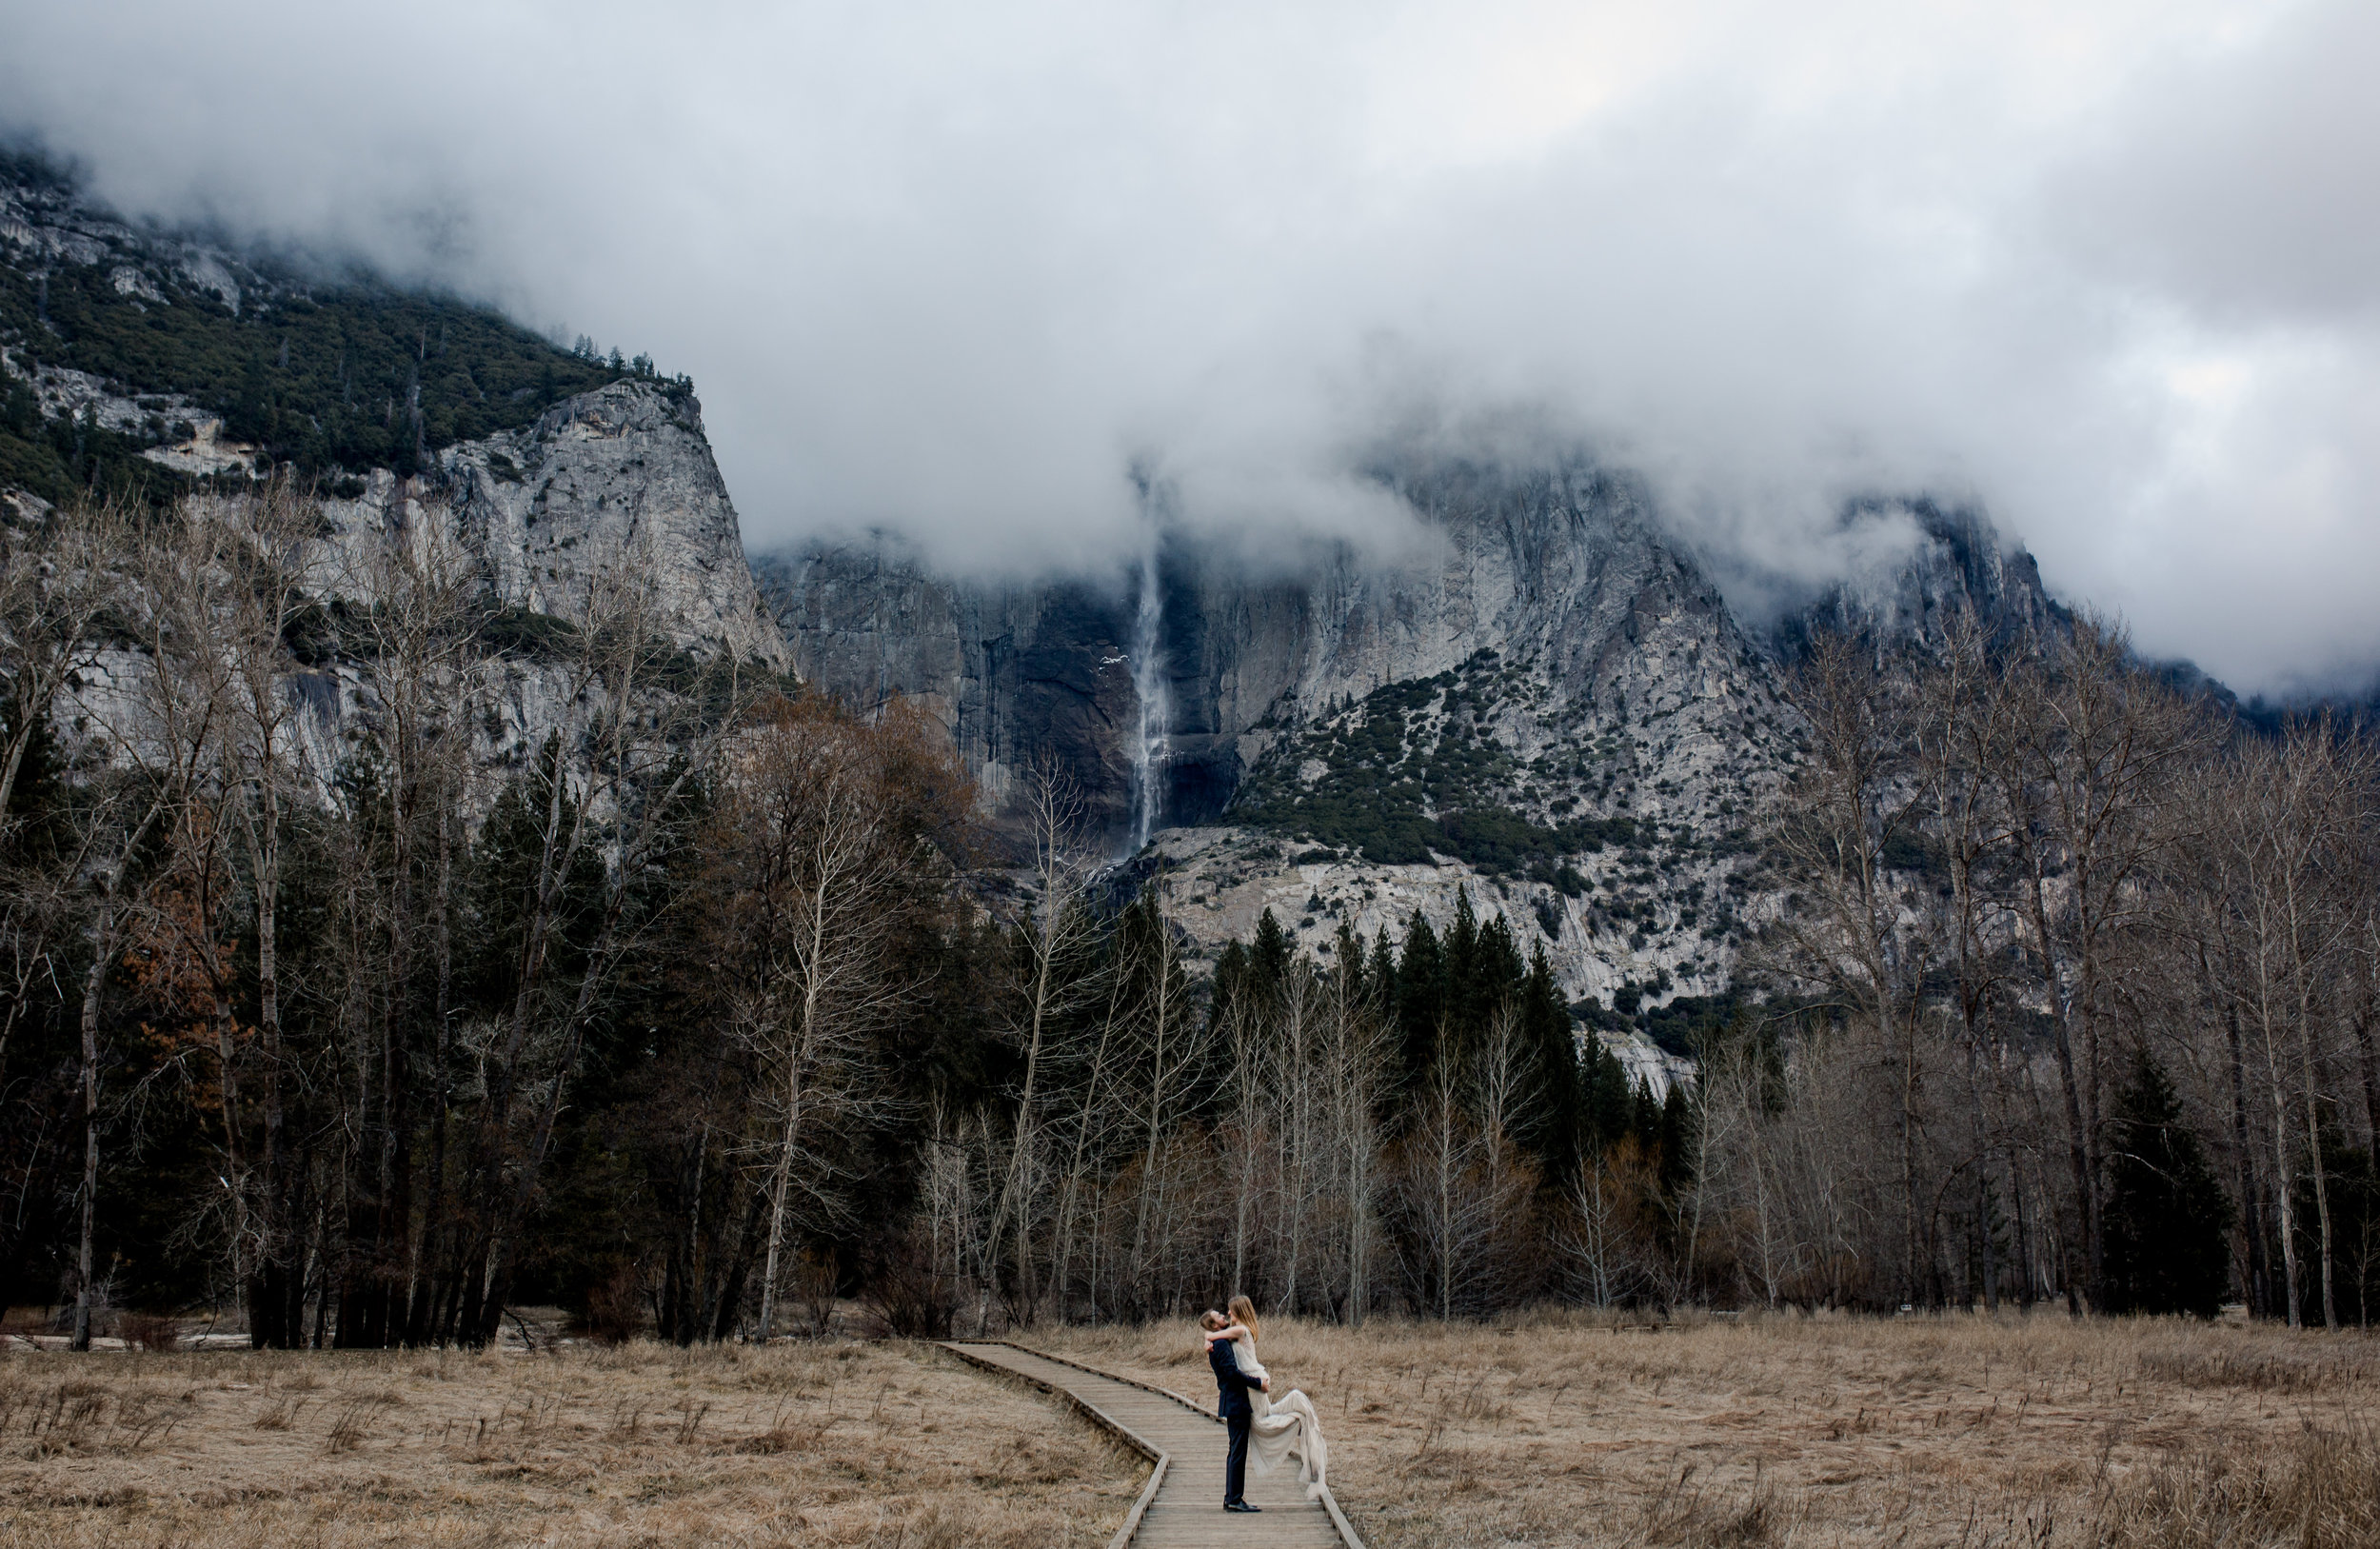 nicole-daacke-photography-yousemite-national-park-elopement-photographer-winter-cloud-moody-elope-inspiration-yosemite-valley-tunnel-view-winter-cloud-fog-weather-wedding-photos-97.jpg